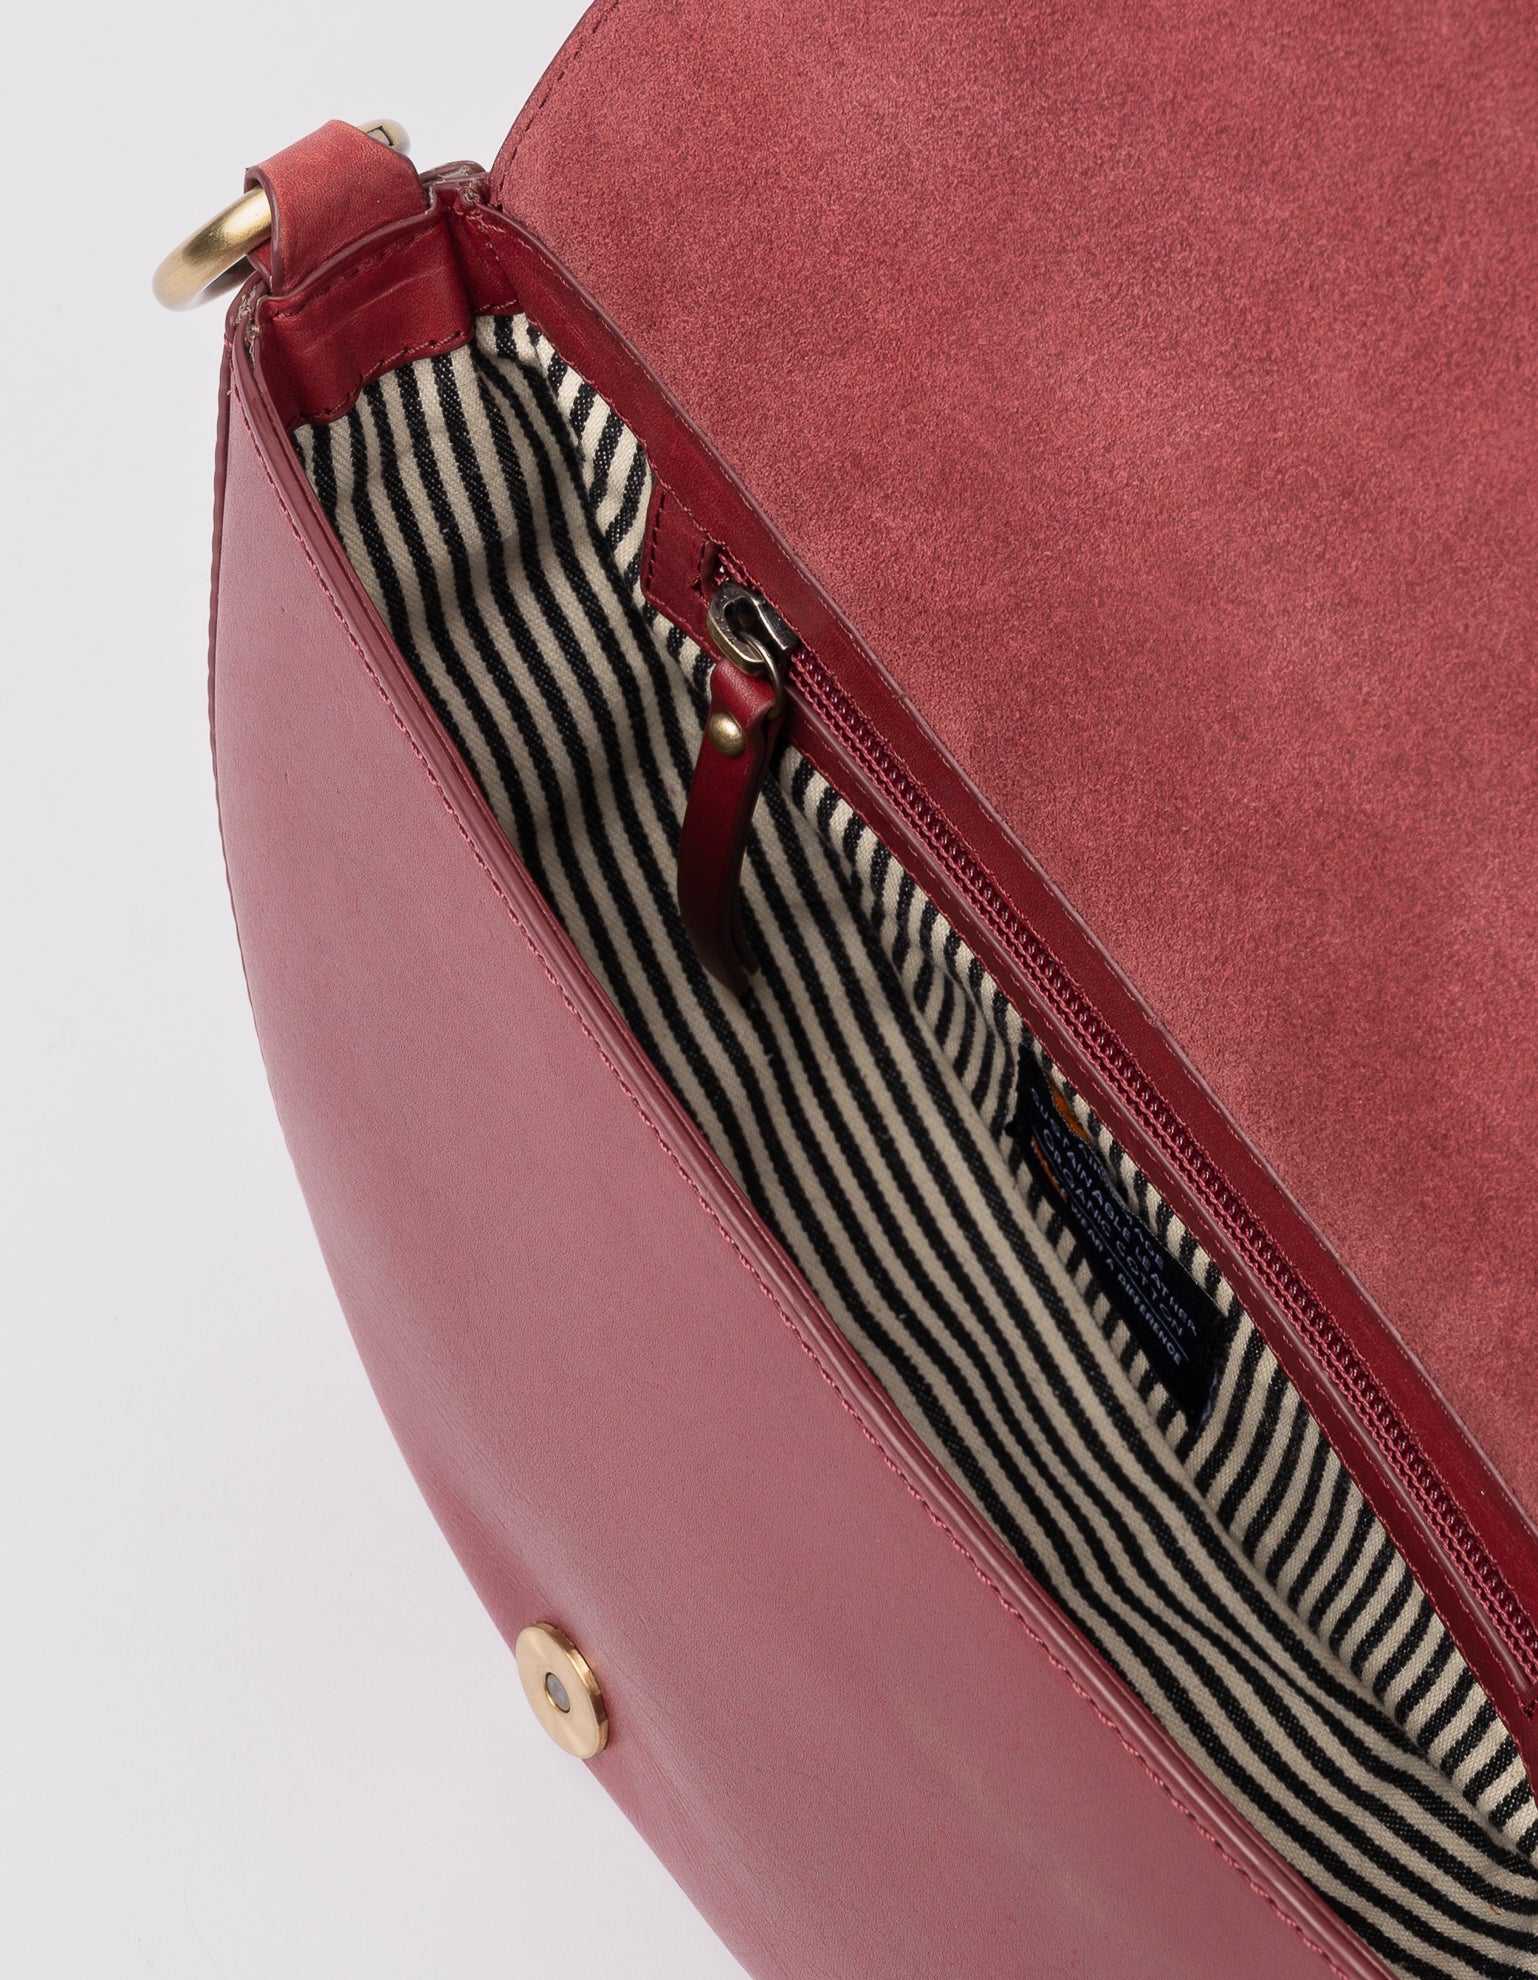 Laura Bag in Ruby Classic Leather ft. Checkered Webbing Strap - Inside product image